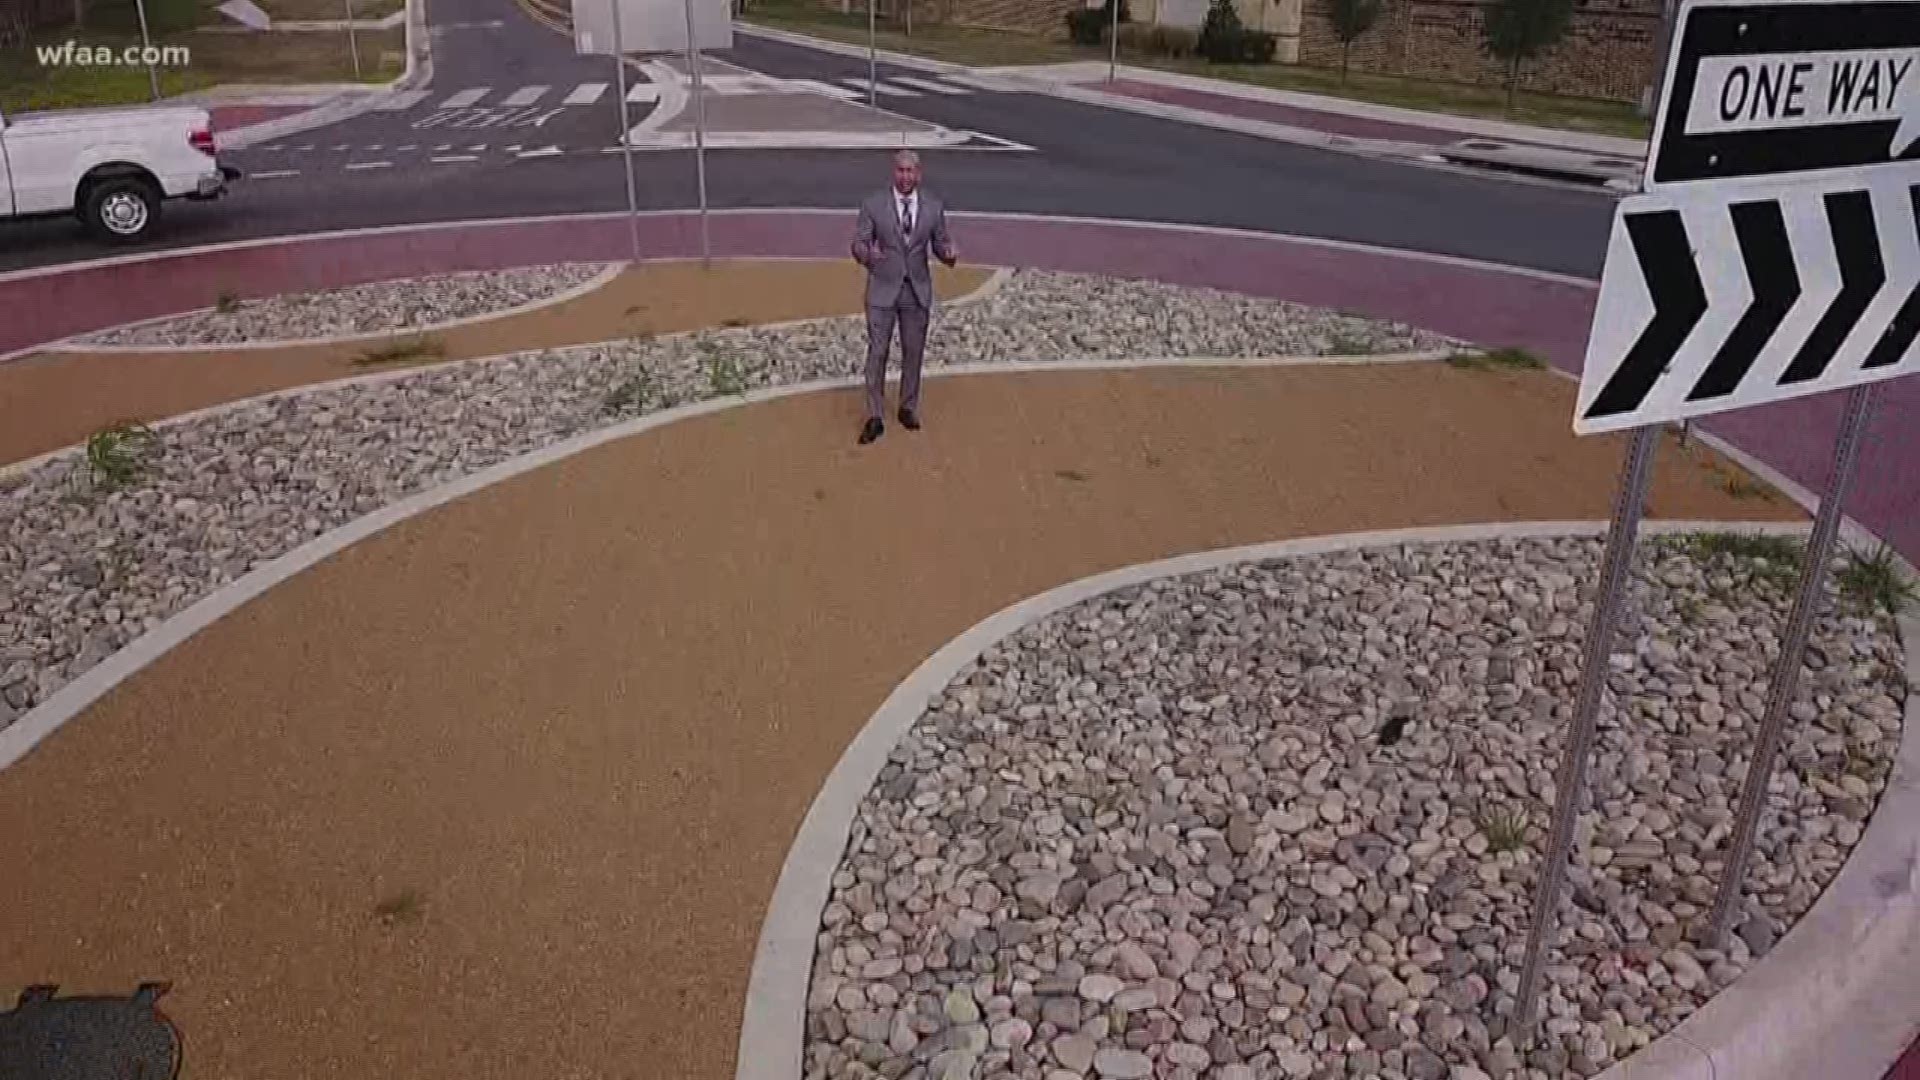 New roundabouts are safe, quick but only if used correctly